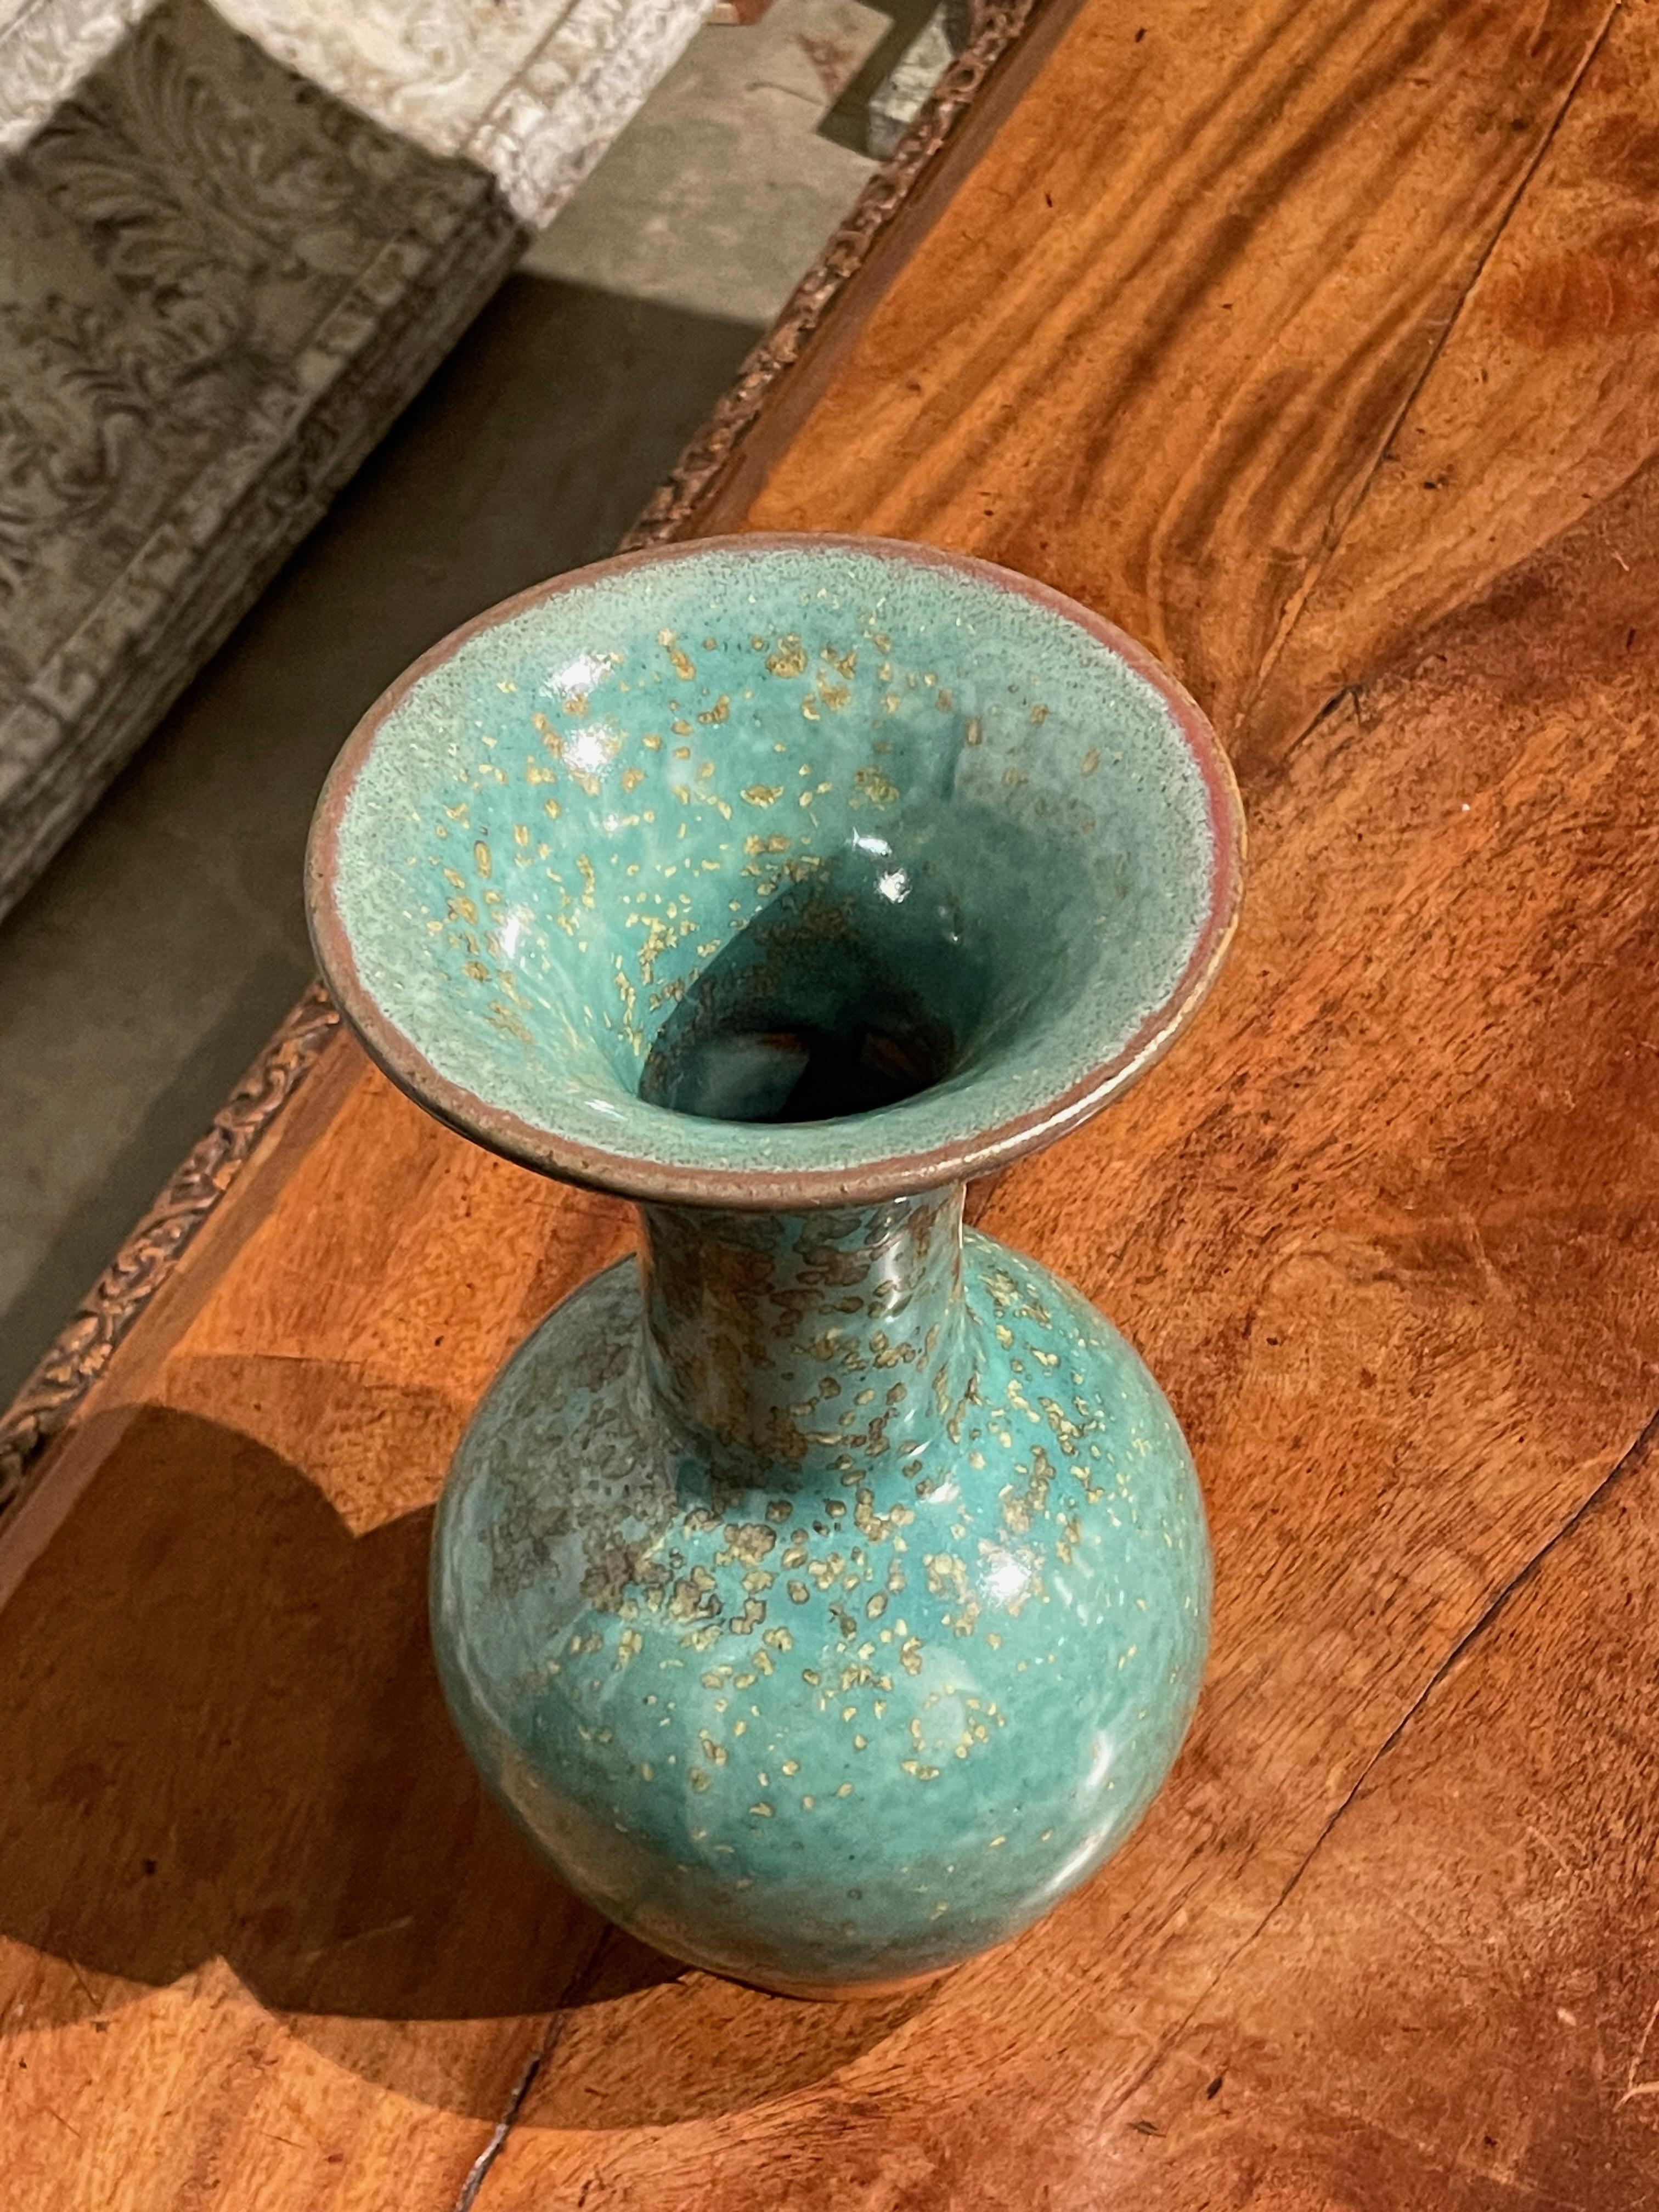 Ceramic Turquoise with Gold Speckled Glaze Wide Mouth Opening Vase, China, Contemporary